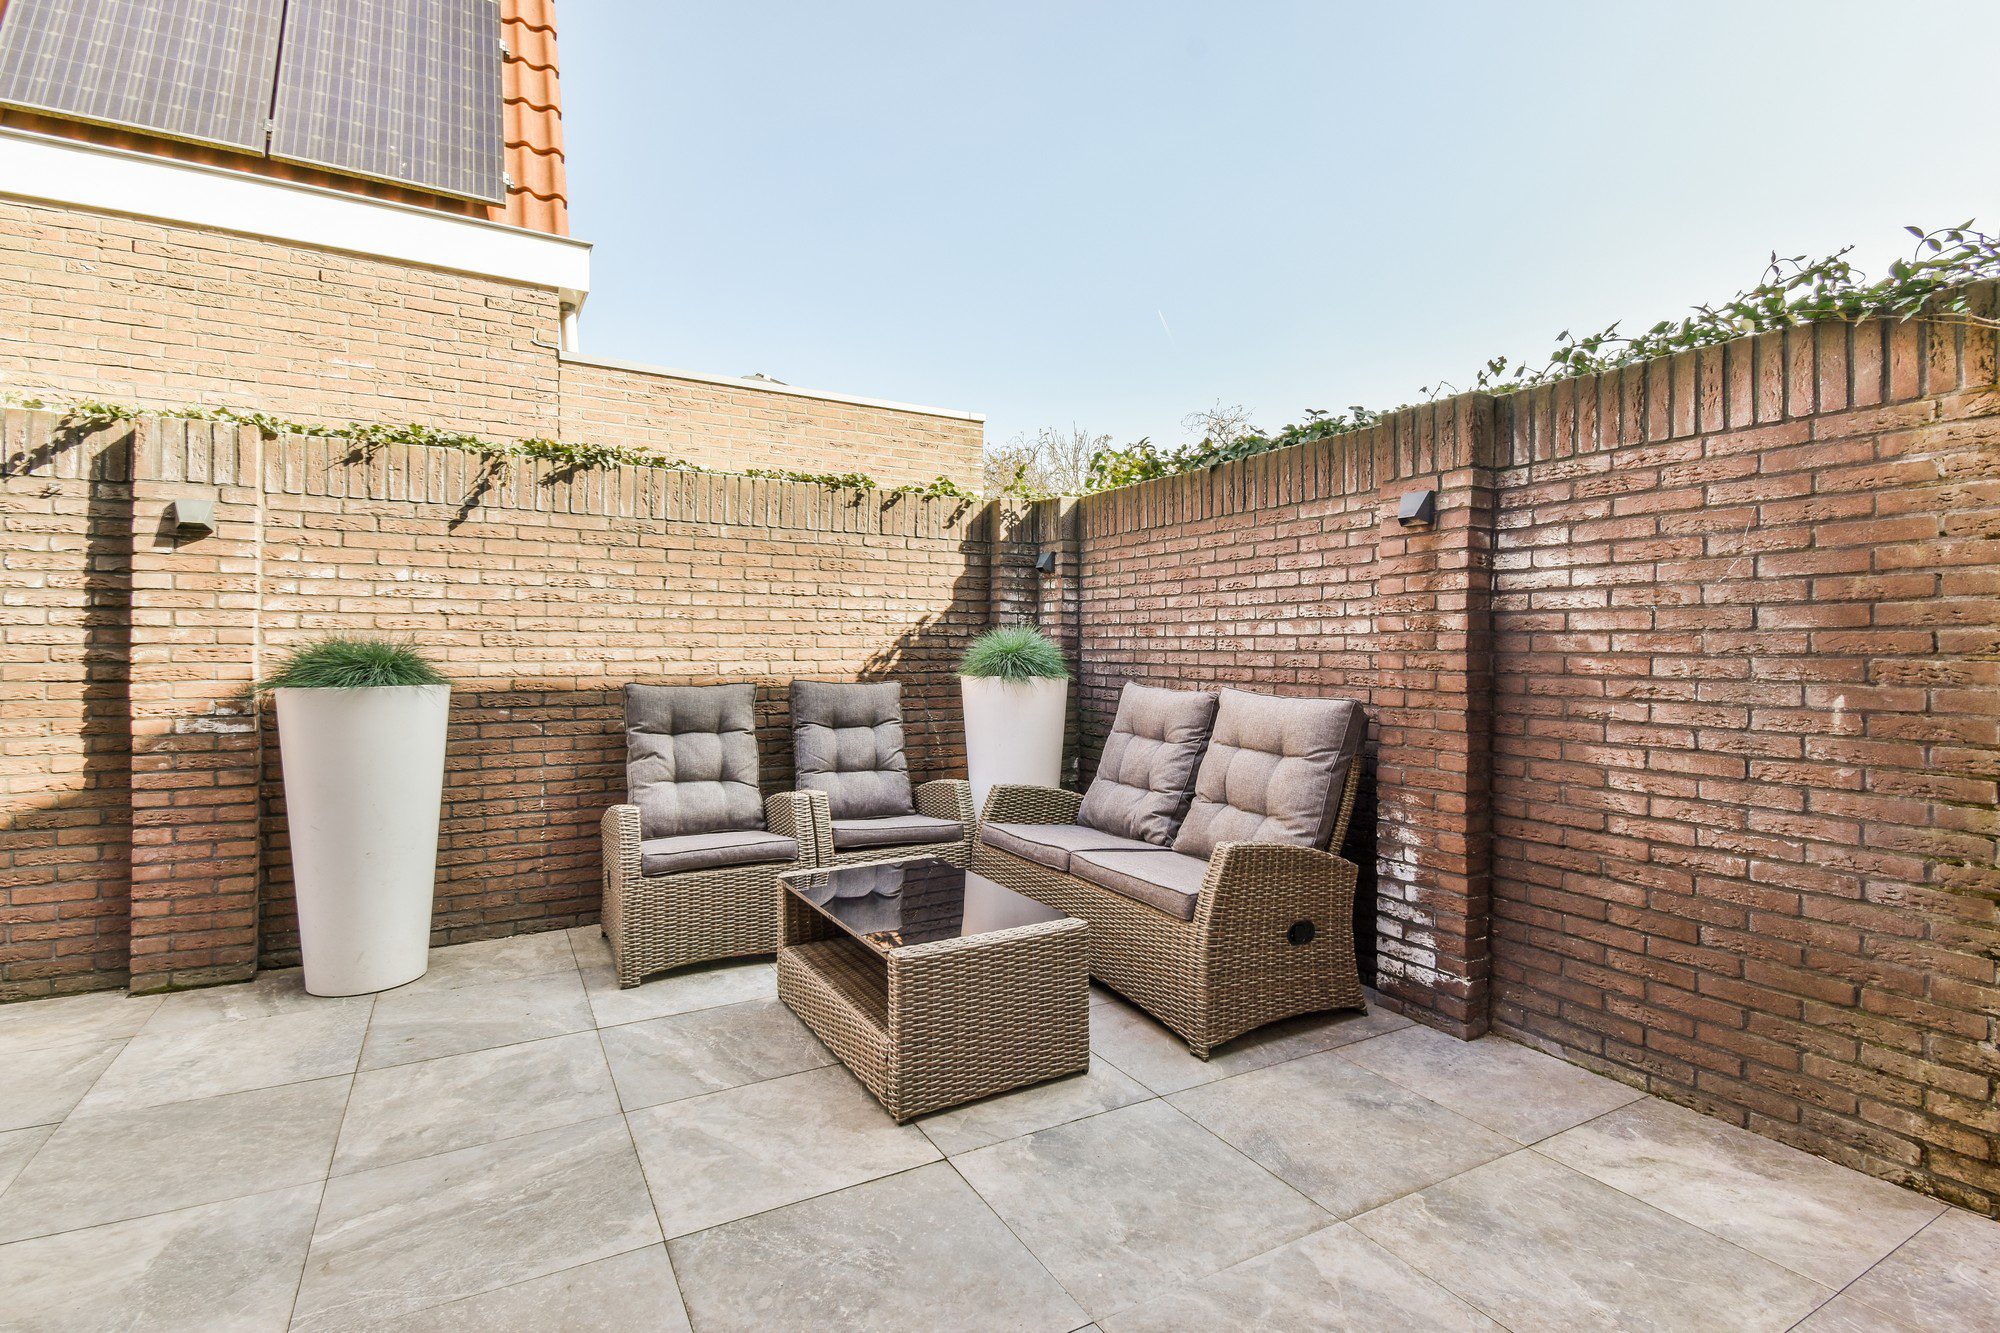 This image shows an outdoor patio area. The space is enclosed by brick walls and the floor is tiled with large, square stone tiles. There is a set of patio furniture, which includes a couple of single seats and a loveseat, all made with a wicker-like material and fitted with grey cushions for comfort. In front of the seating arrangement, there is a small matching wicker table with a glass top. On the side, there is a tall white planter with a green plant, adding a touch of nature to the space. The roof above appears to have solar panels installed. It's a sunny day and the setting would be appropriate for outdoor relaxation or social gatherings.